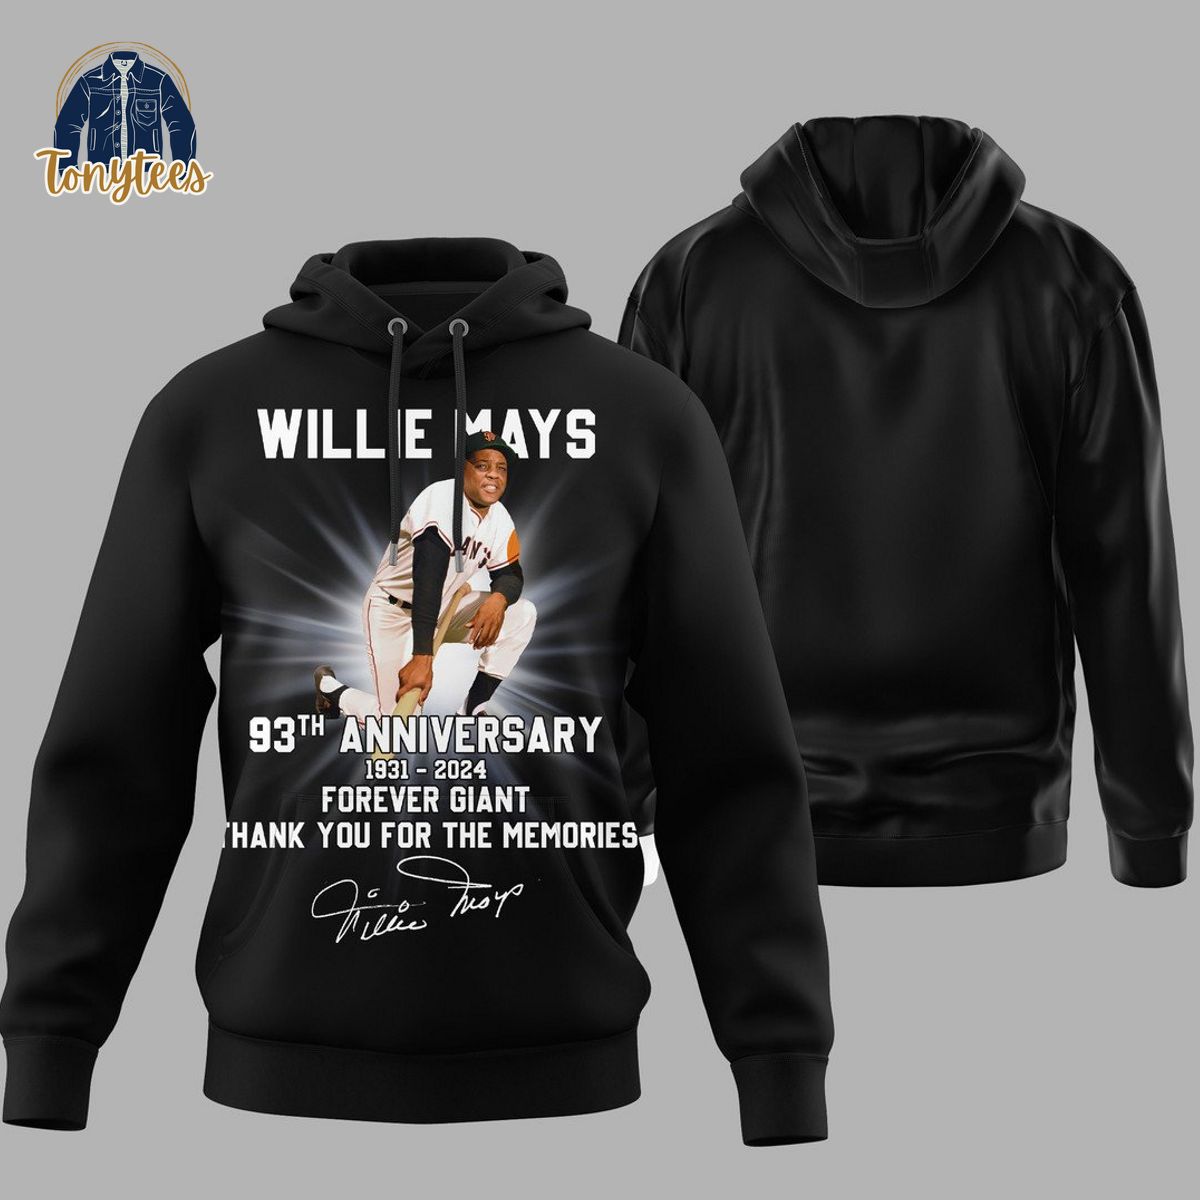 Willie Mays 83th anniversary forever giant 3d hoodie shirt